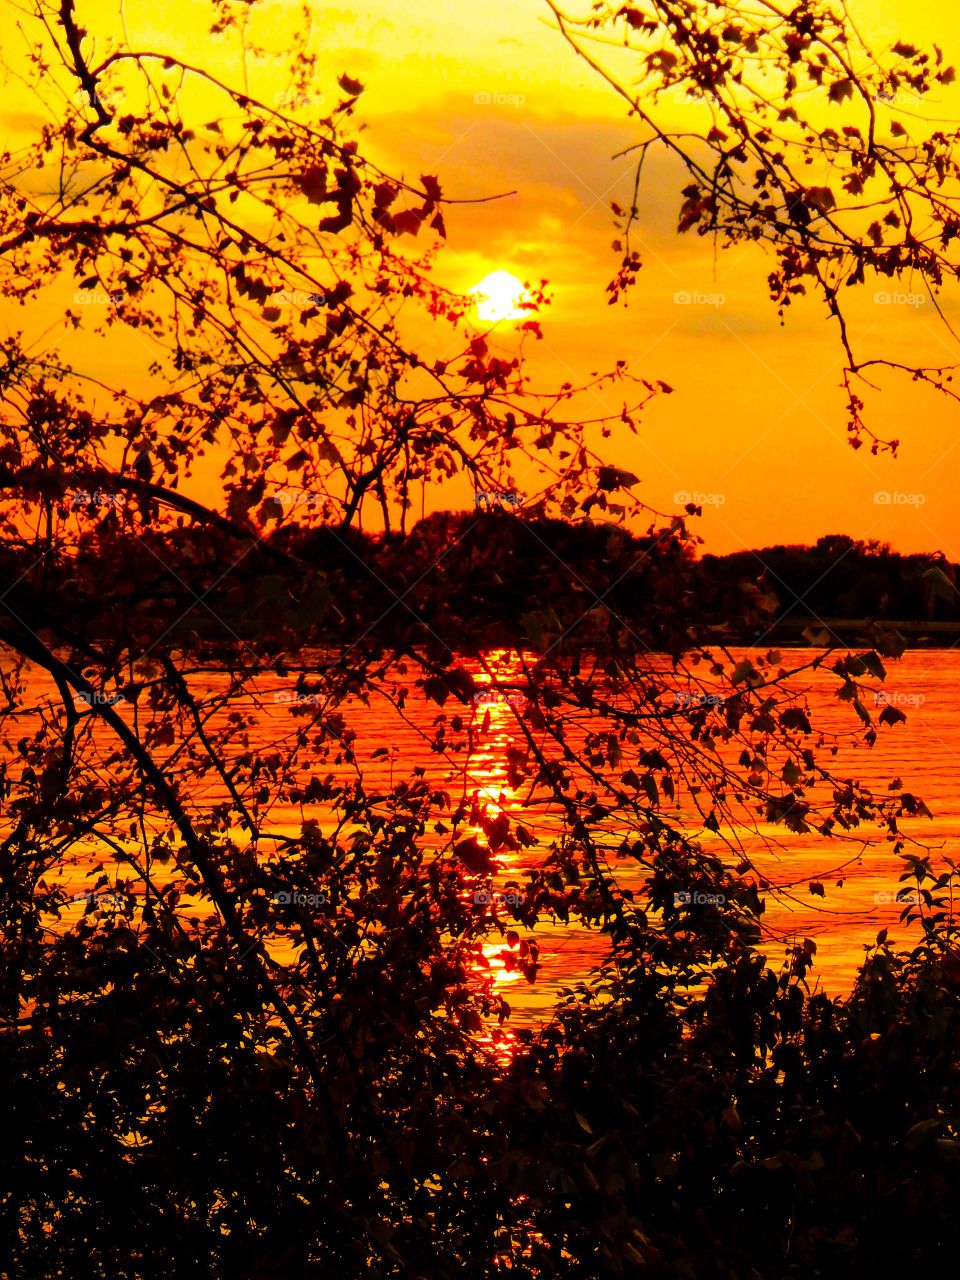 Sunset thru the trees by the lake
